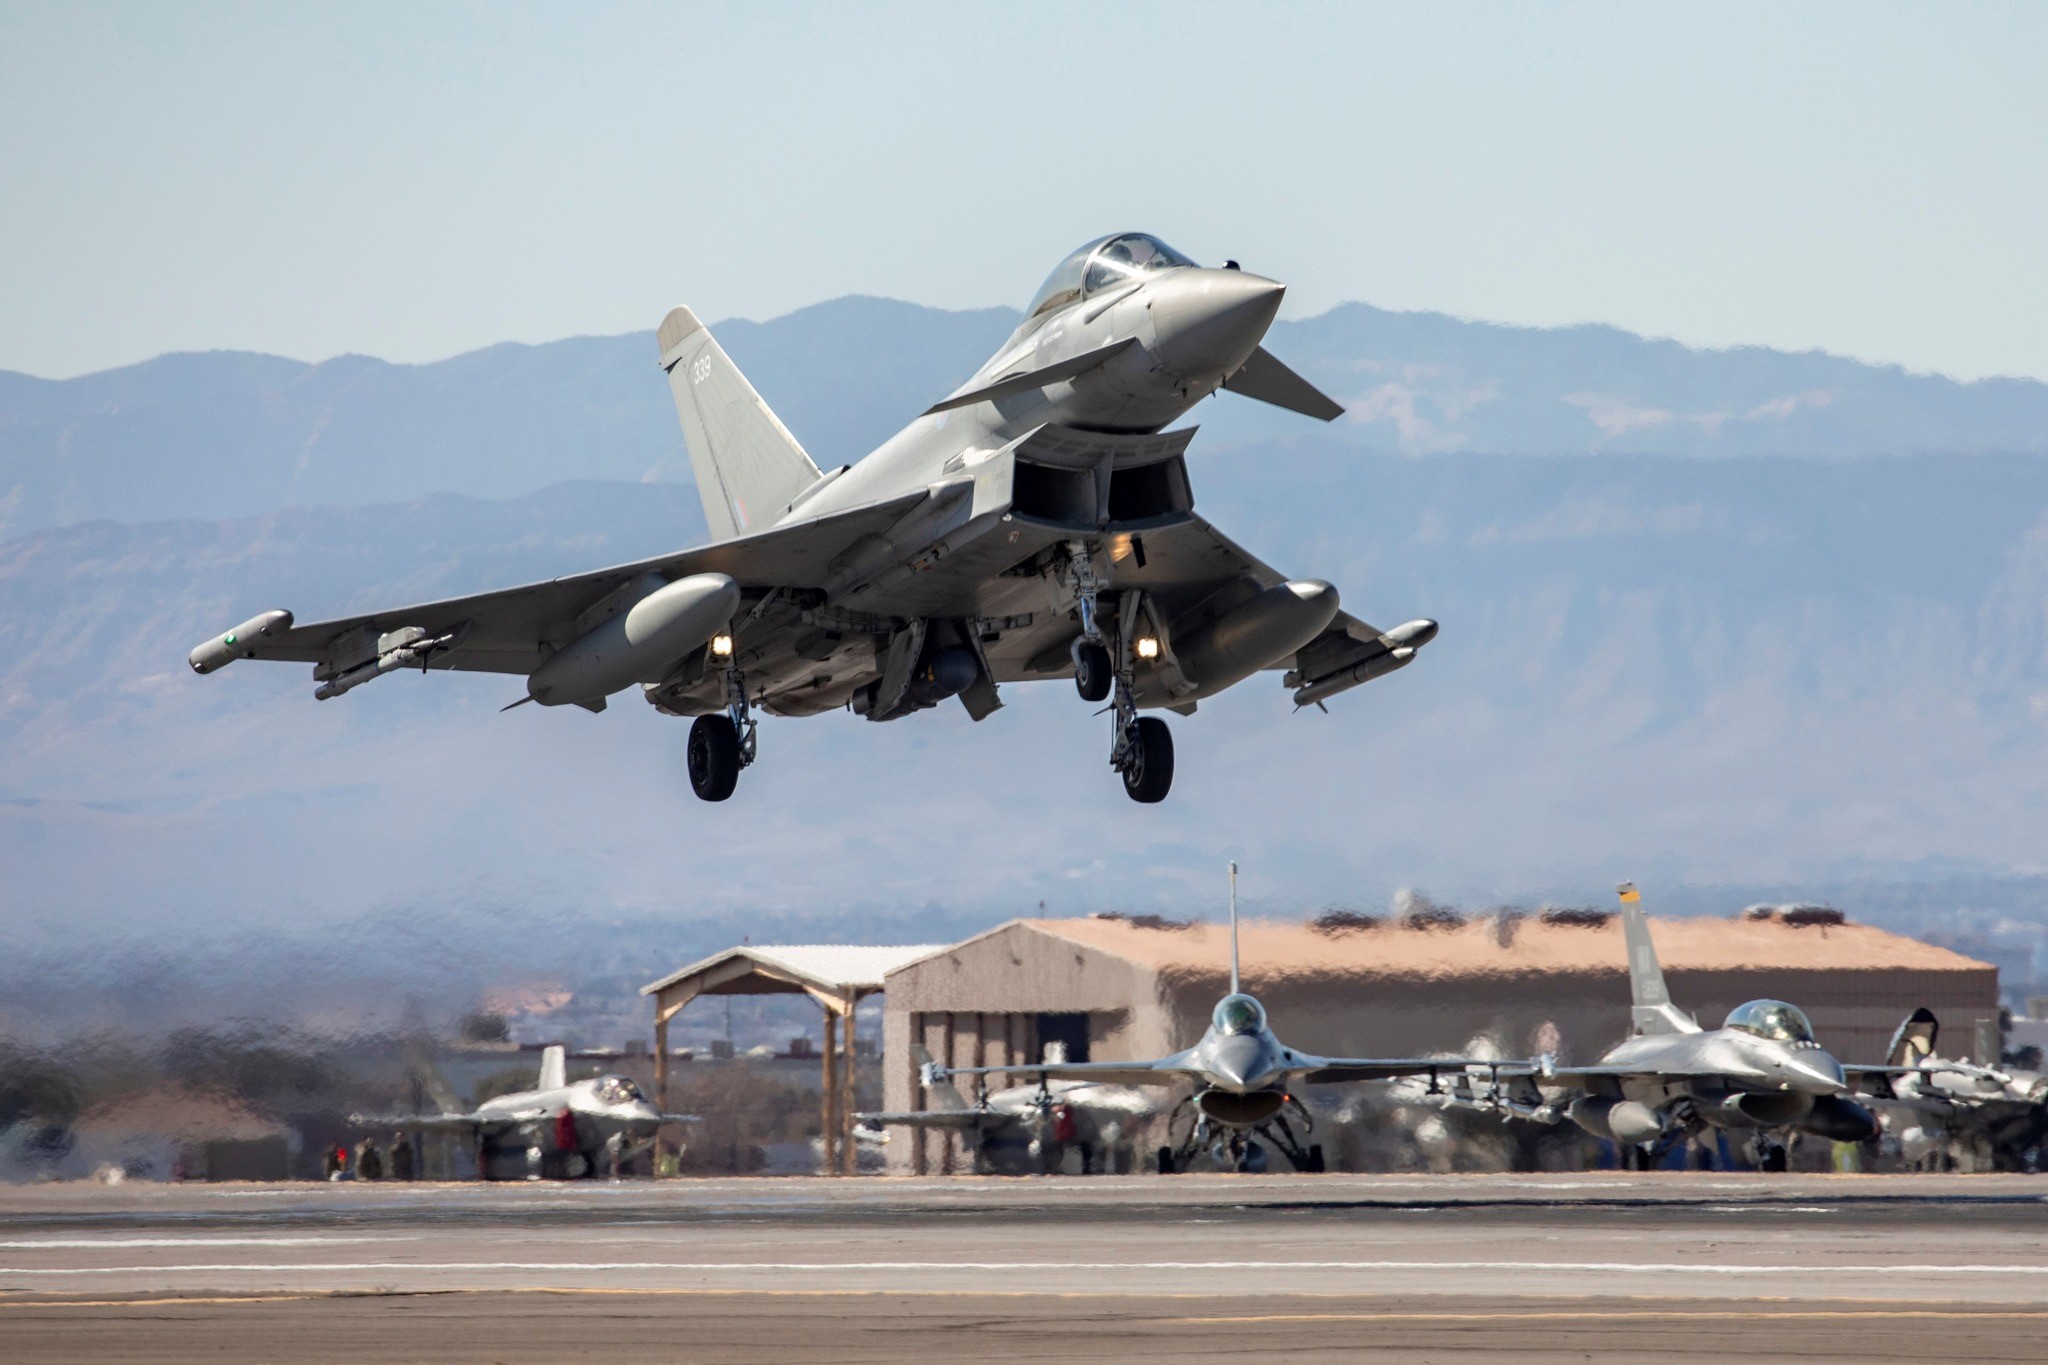 Typhoon taking off, with grounded Typhoons in the background.